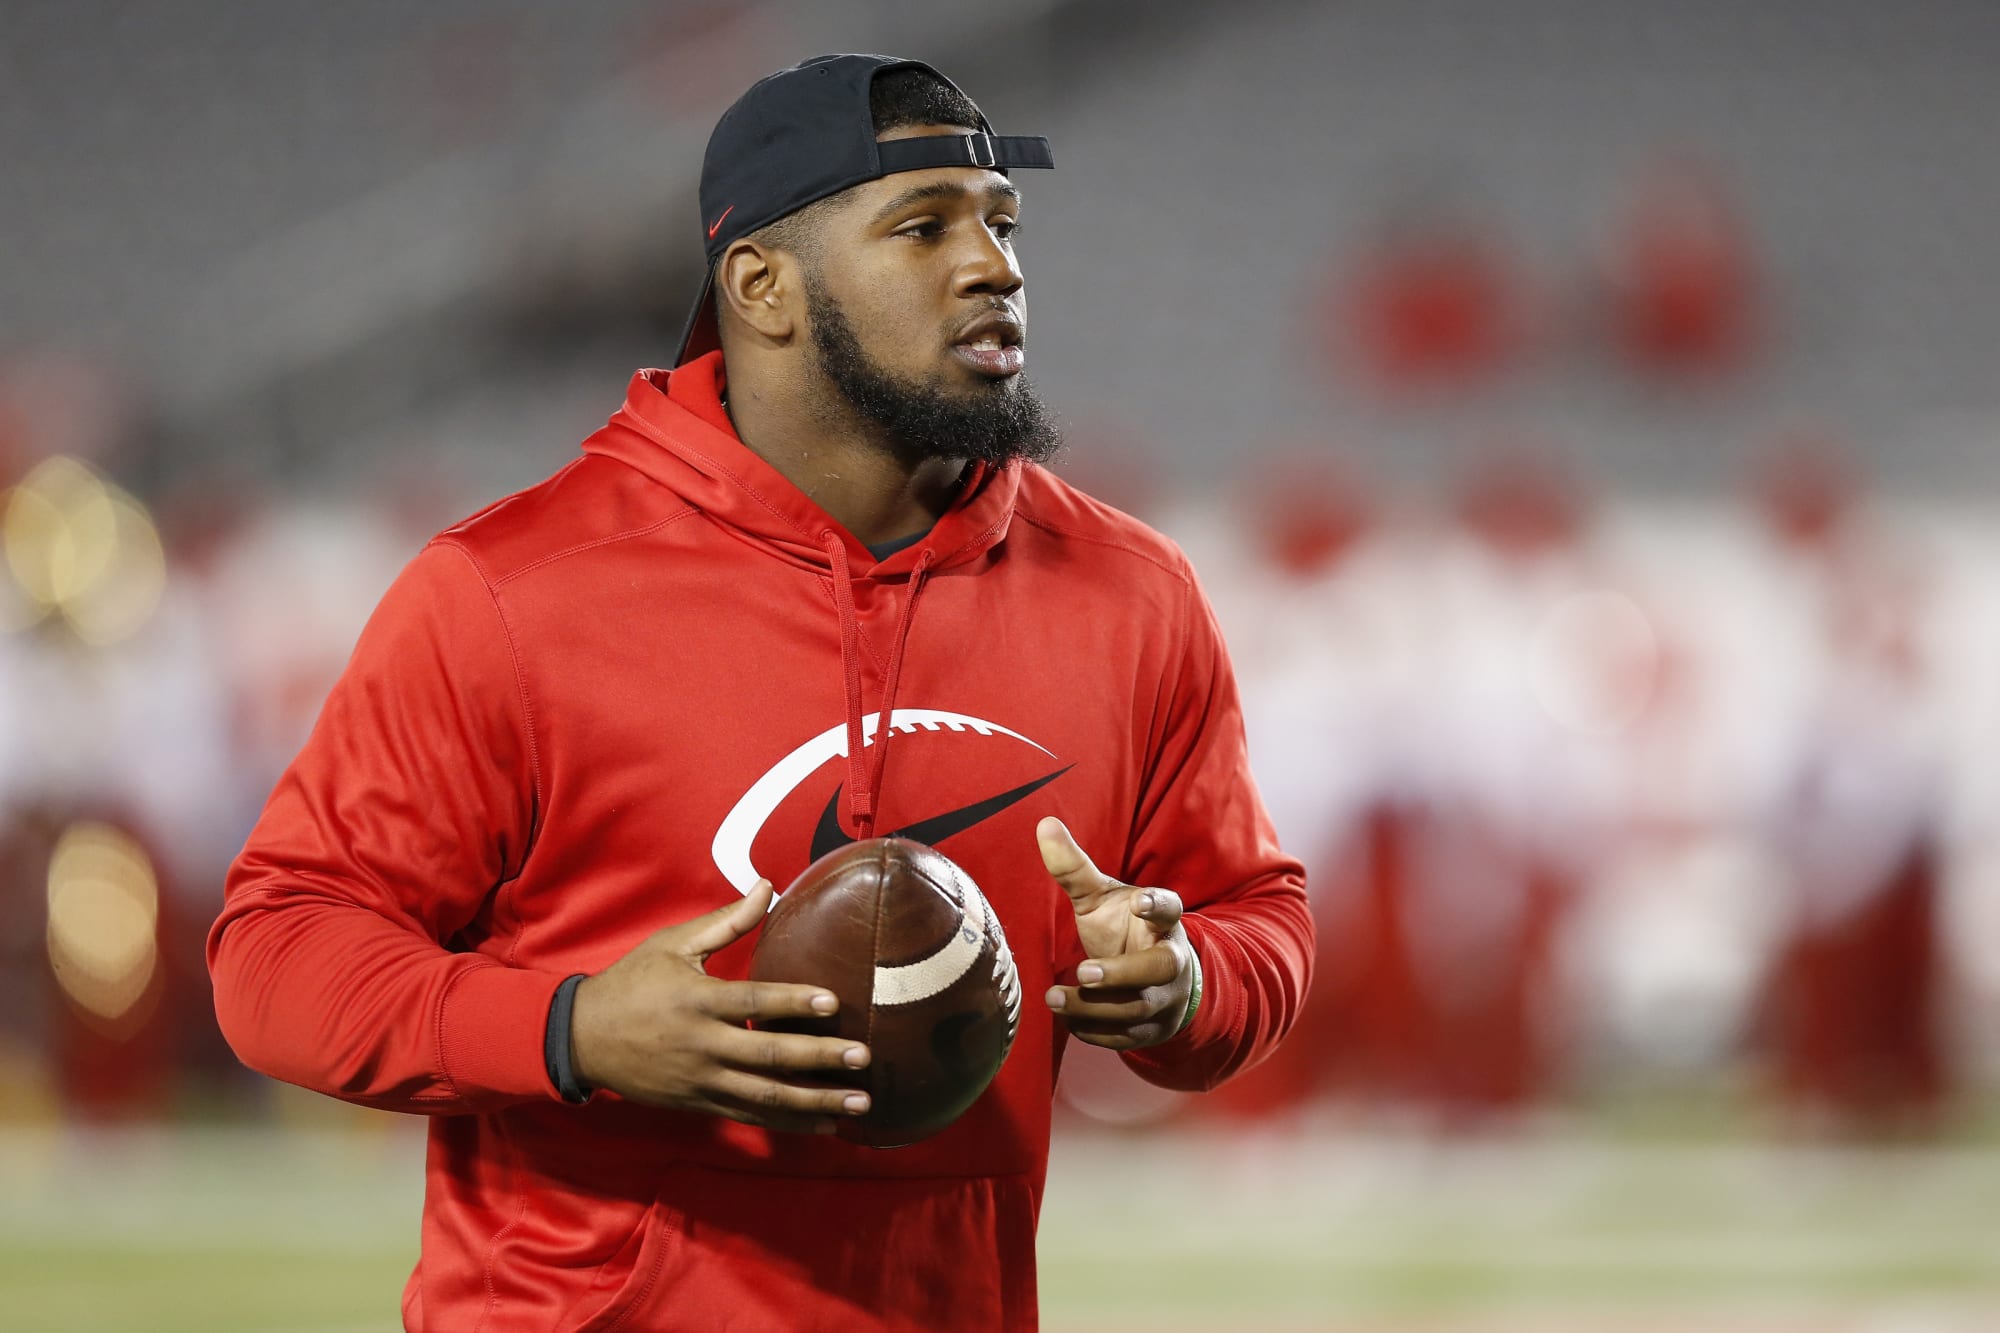 Ed Oliver making the right move by sitting out Houston bowl game